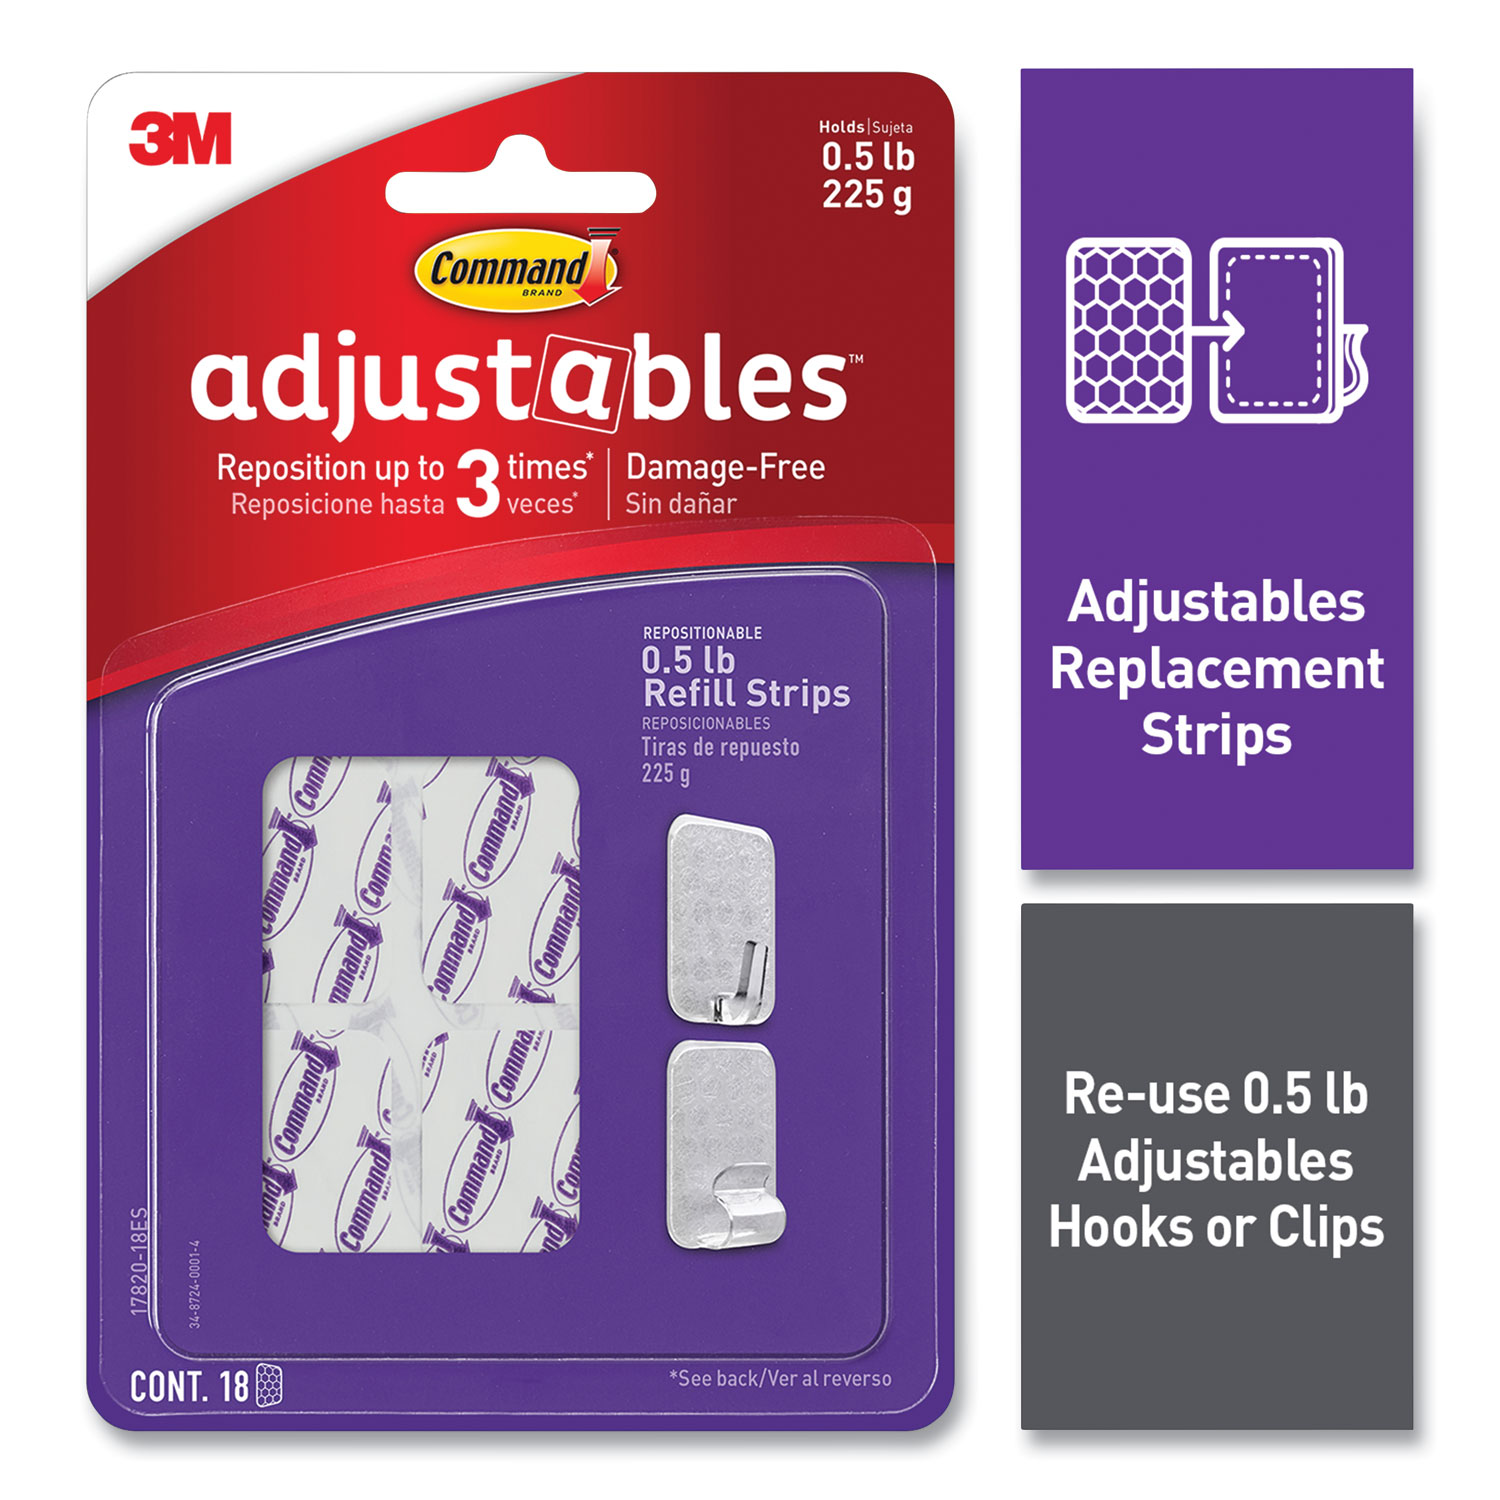  Command 17820-18ES Adjustables Repositionable Mini Refill Strips, Holds up to 0.5 lb, 1.03 x 1.32, White, 18 Strips (MMM24399718) 